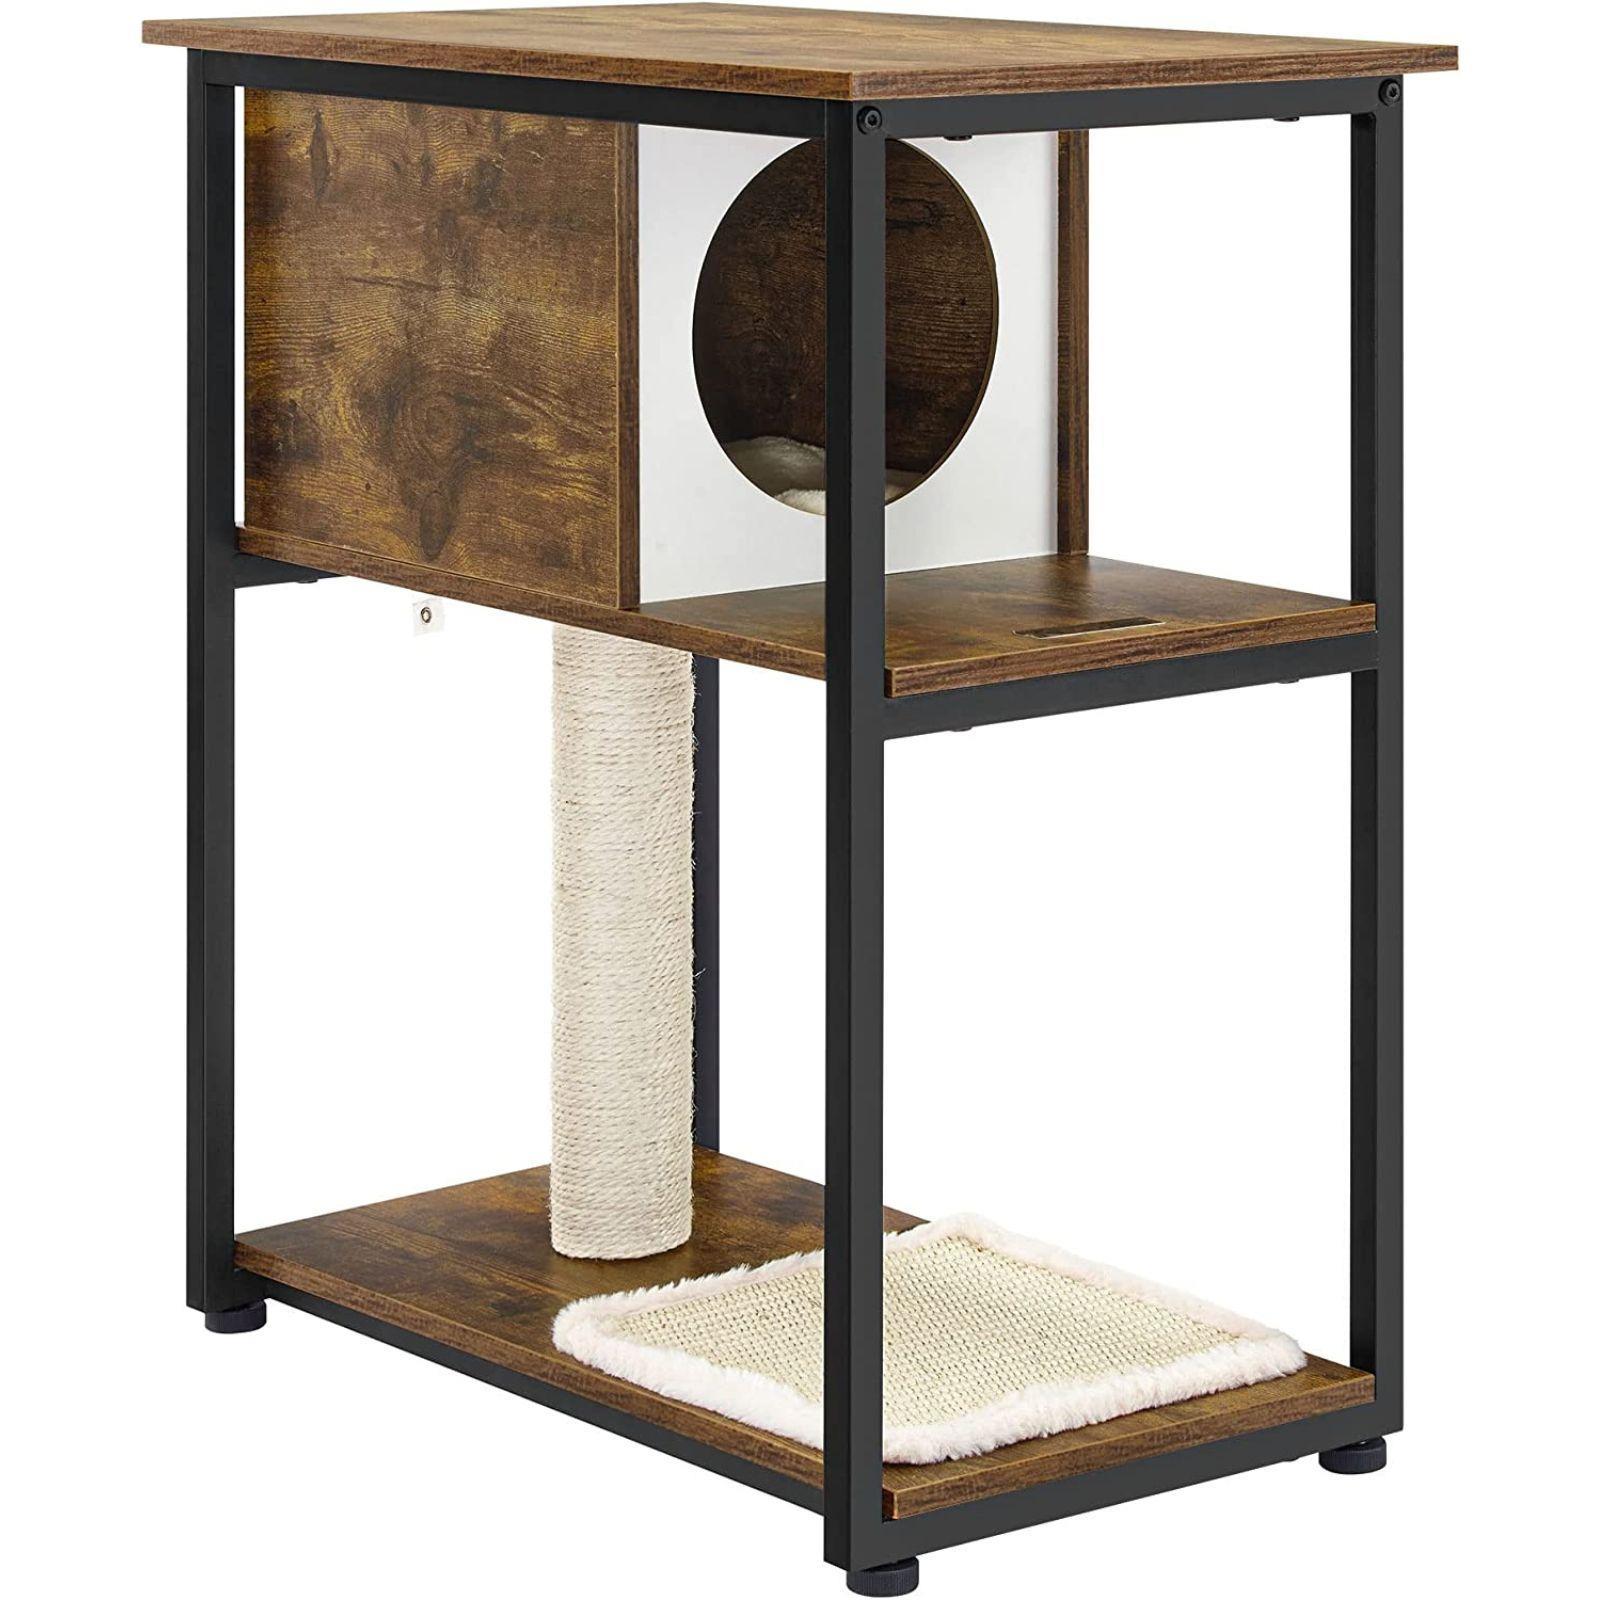 Feandrea Cat Tree House and End Table Bedside Scratching Post Tower - Rustic Brown